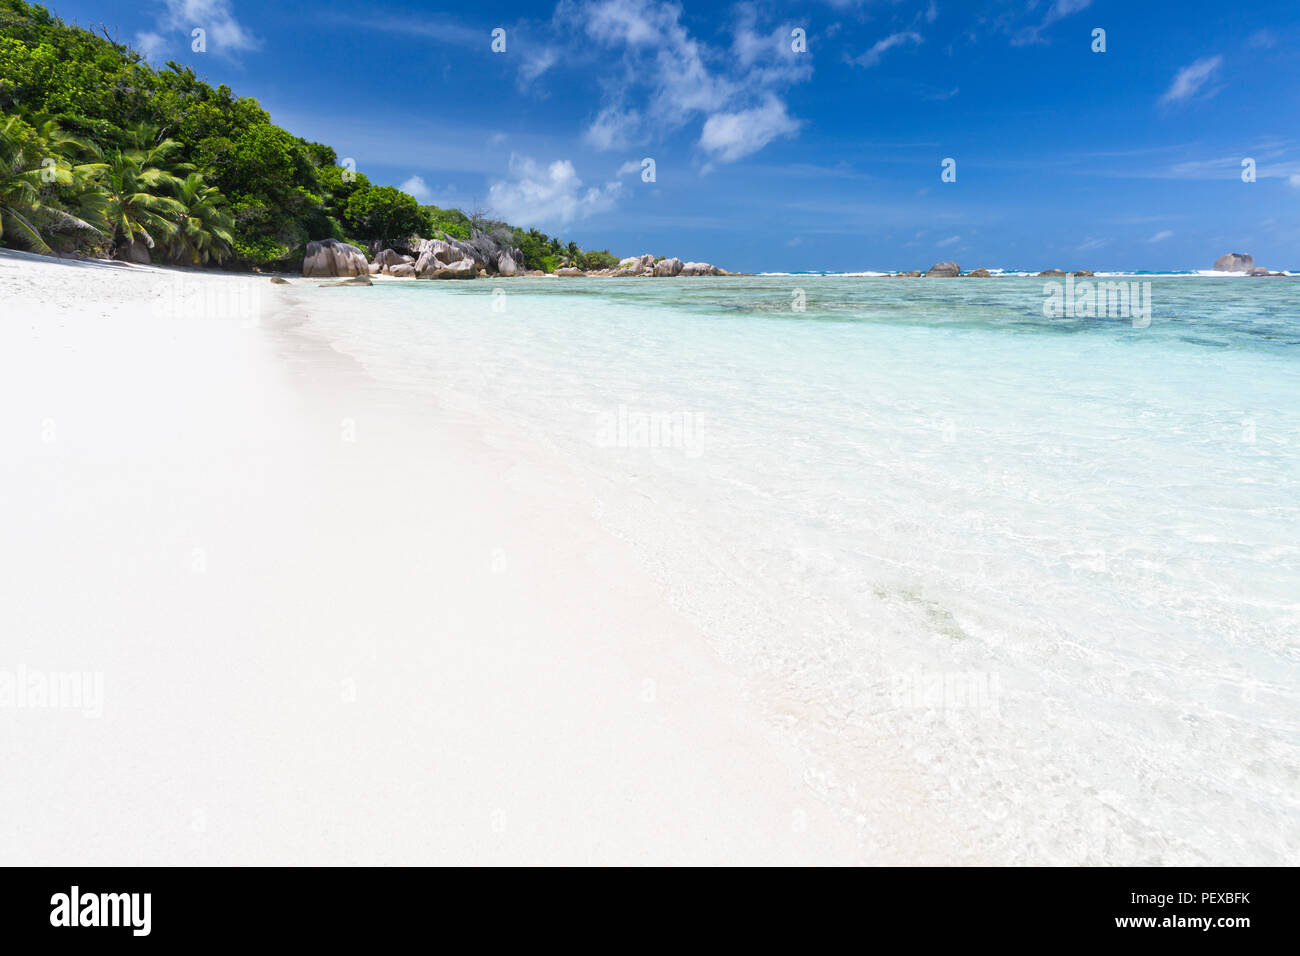 The beautiful tropical beach Anse Source D'Argent in La Digue, Seychelles with crystal clear water, granite rocks and palm trees Stock Photo